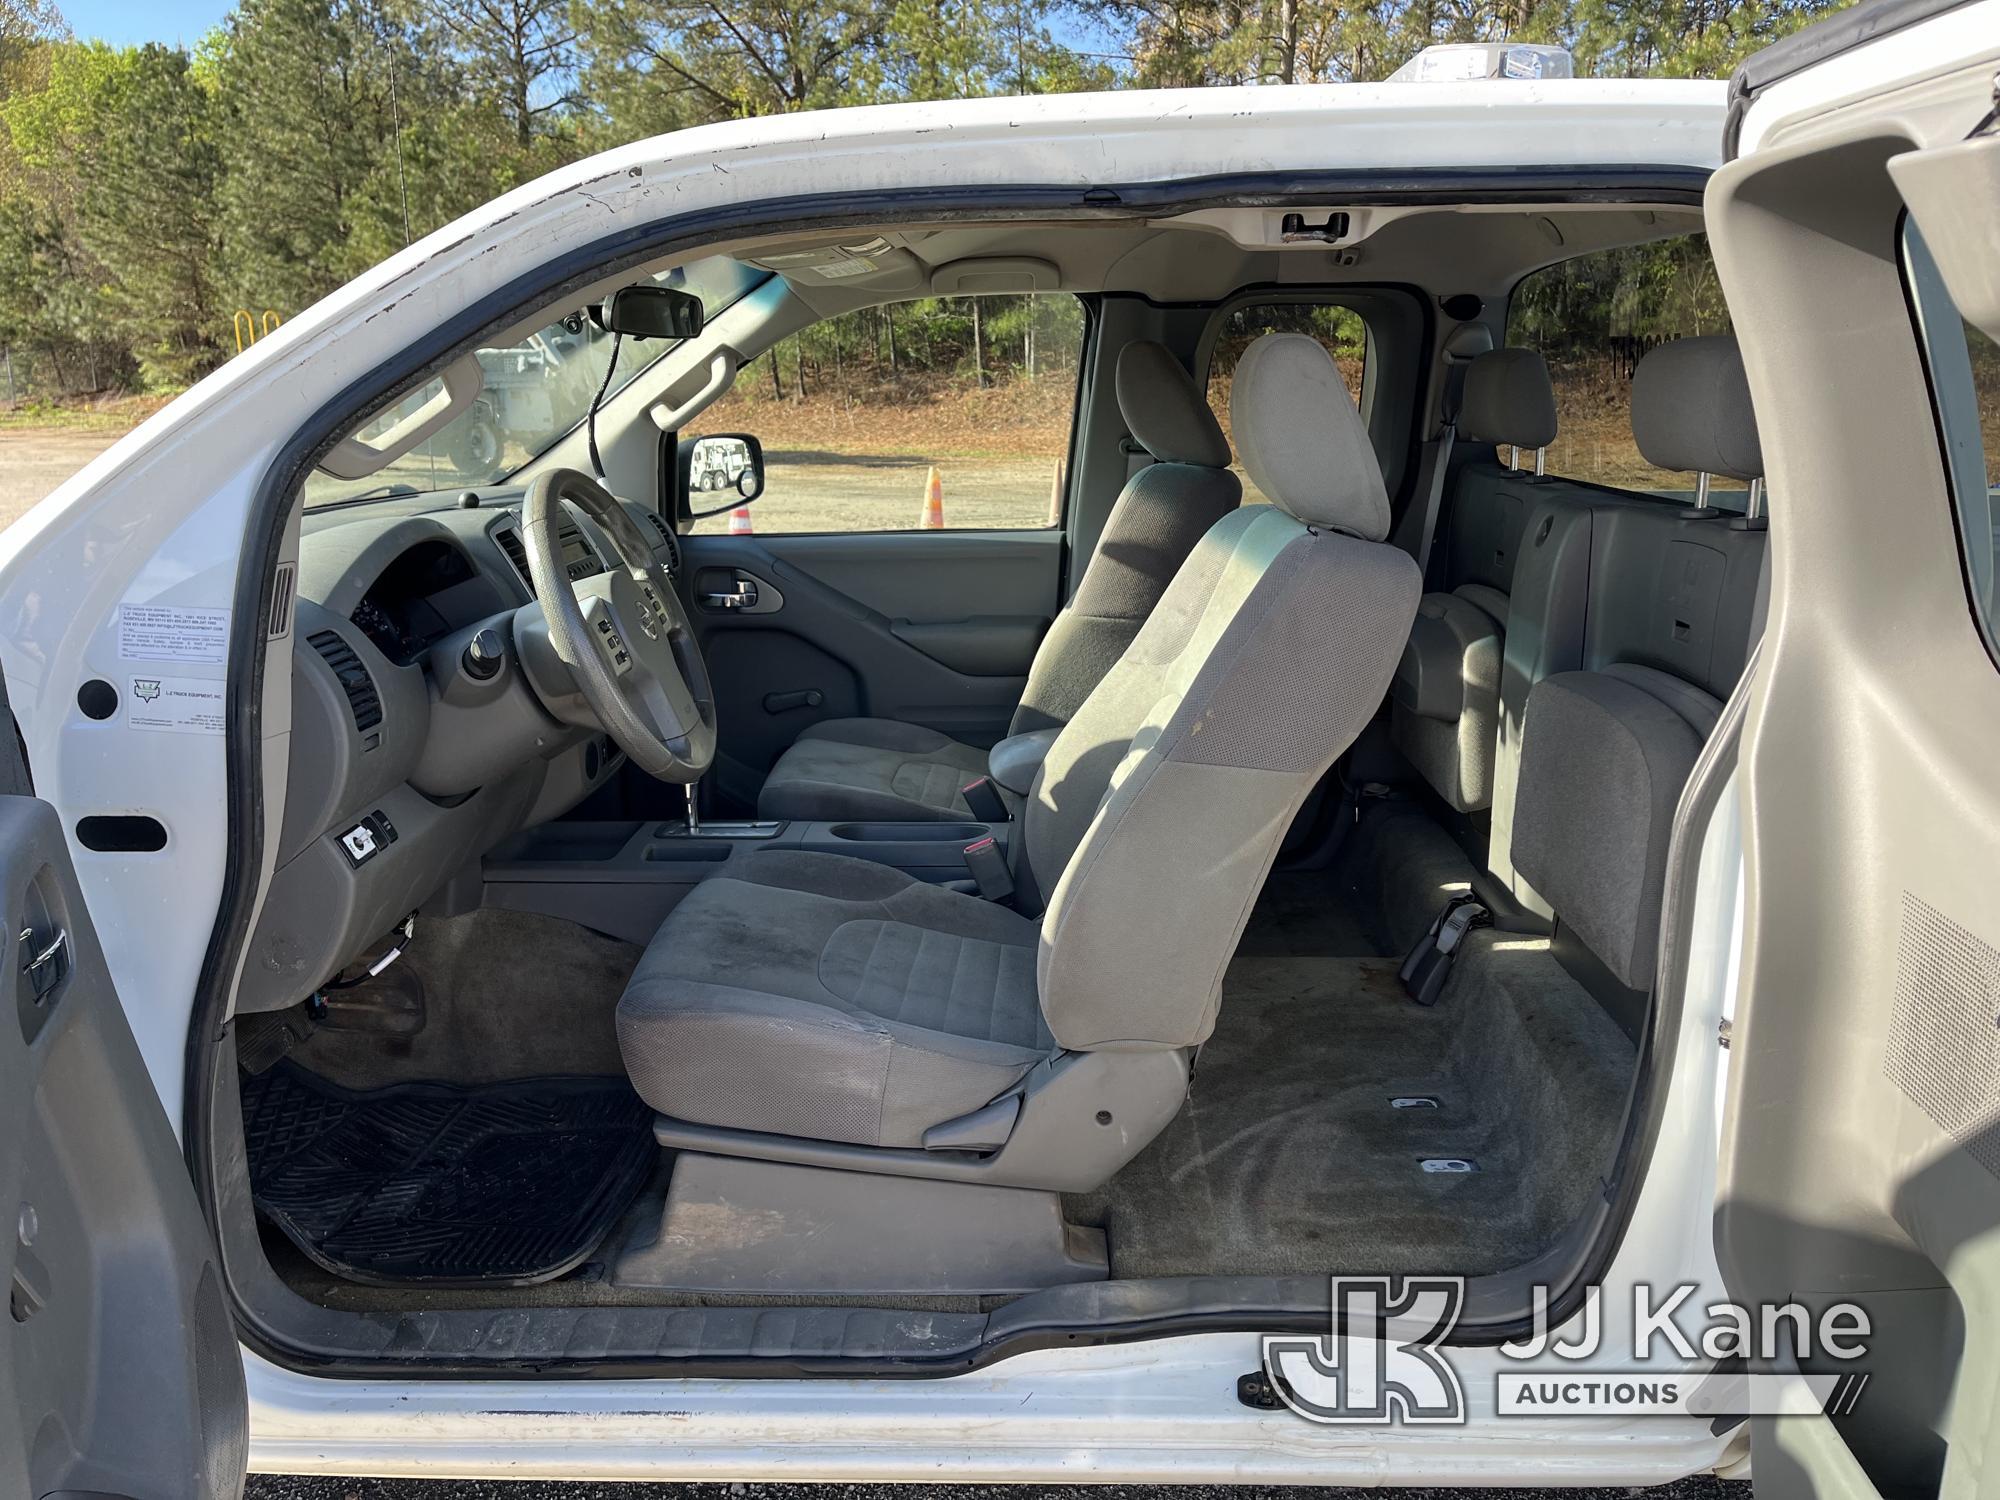 (Chester, VA) 2015 Nissan Frontier Extended-Cab Pickup Truck Runs & Moves) (Check Engine Light On